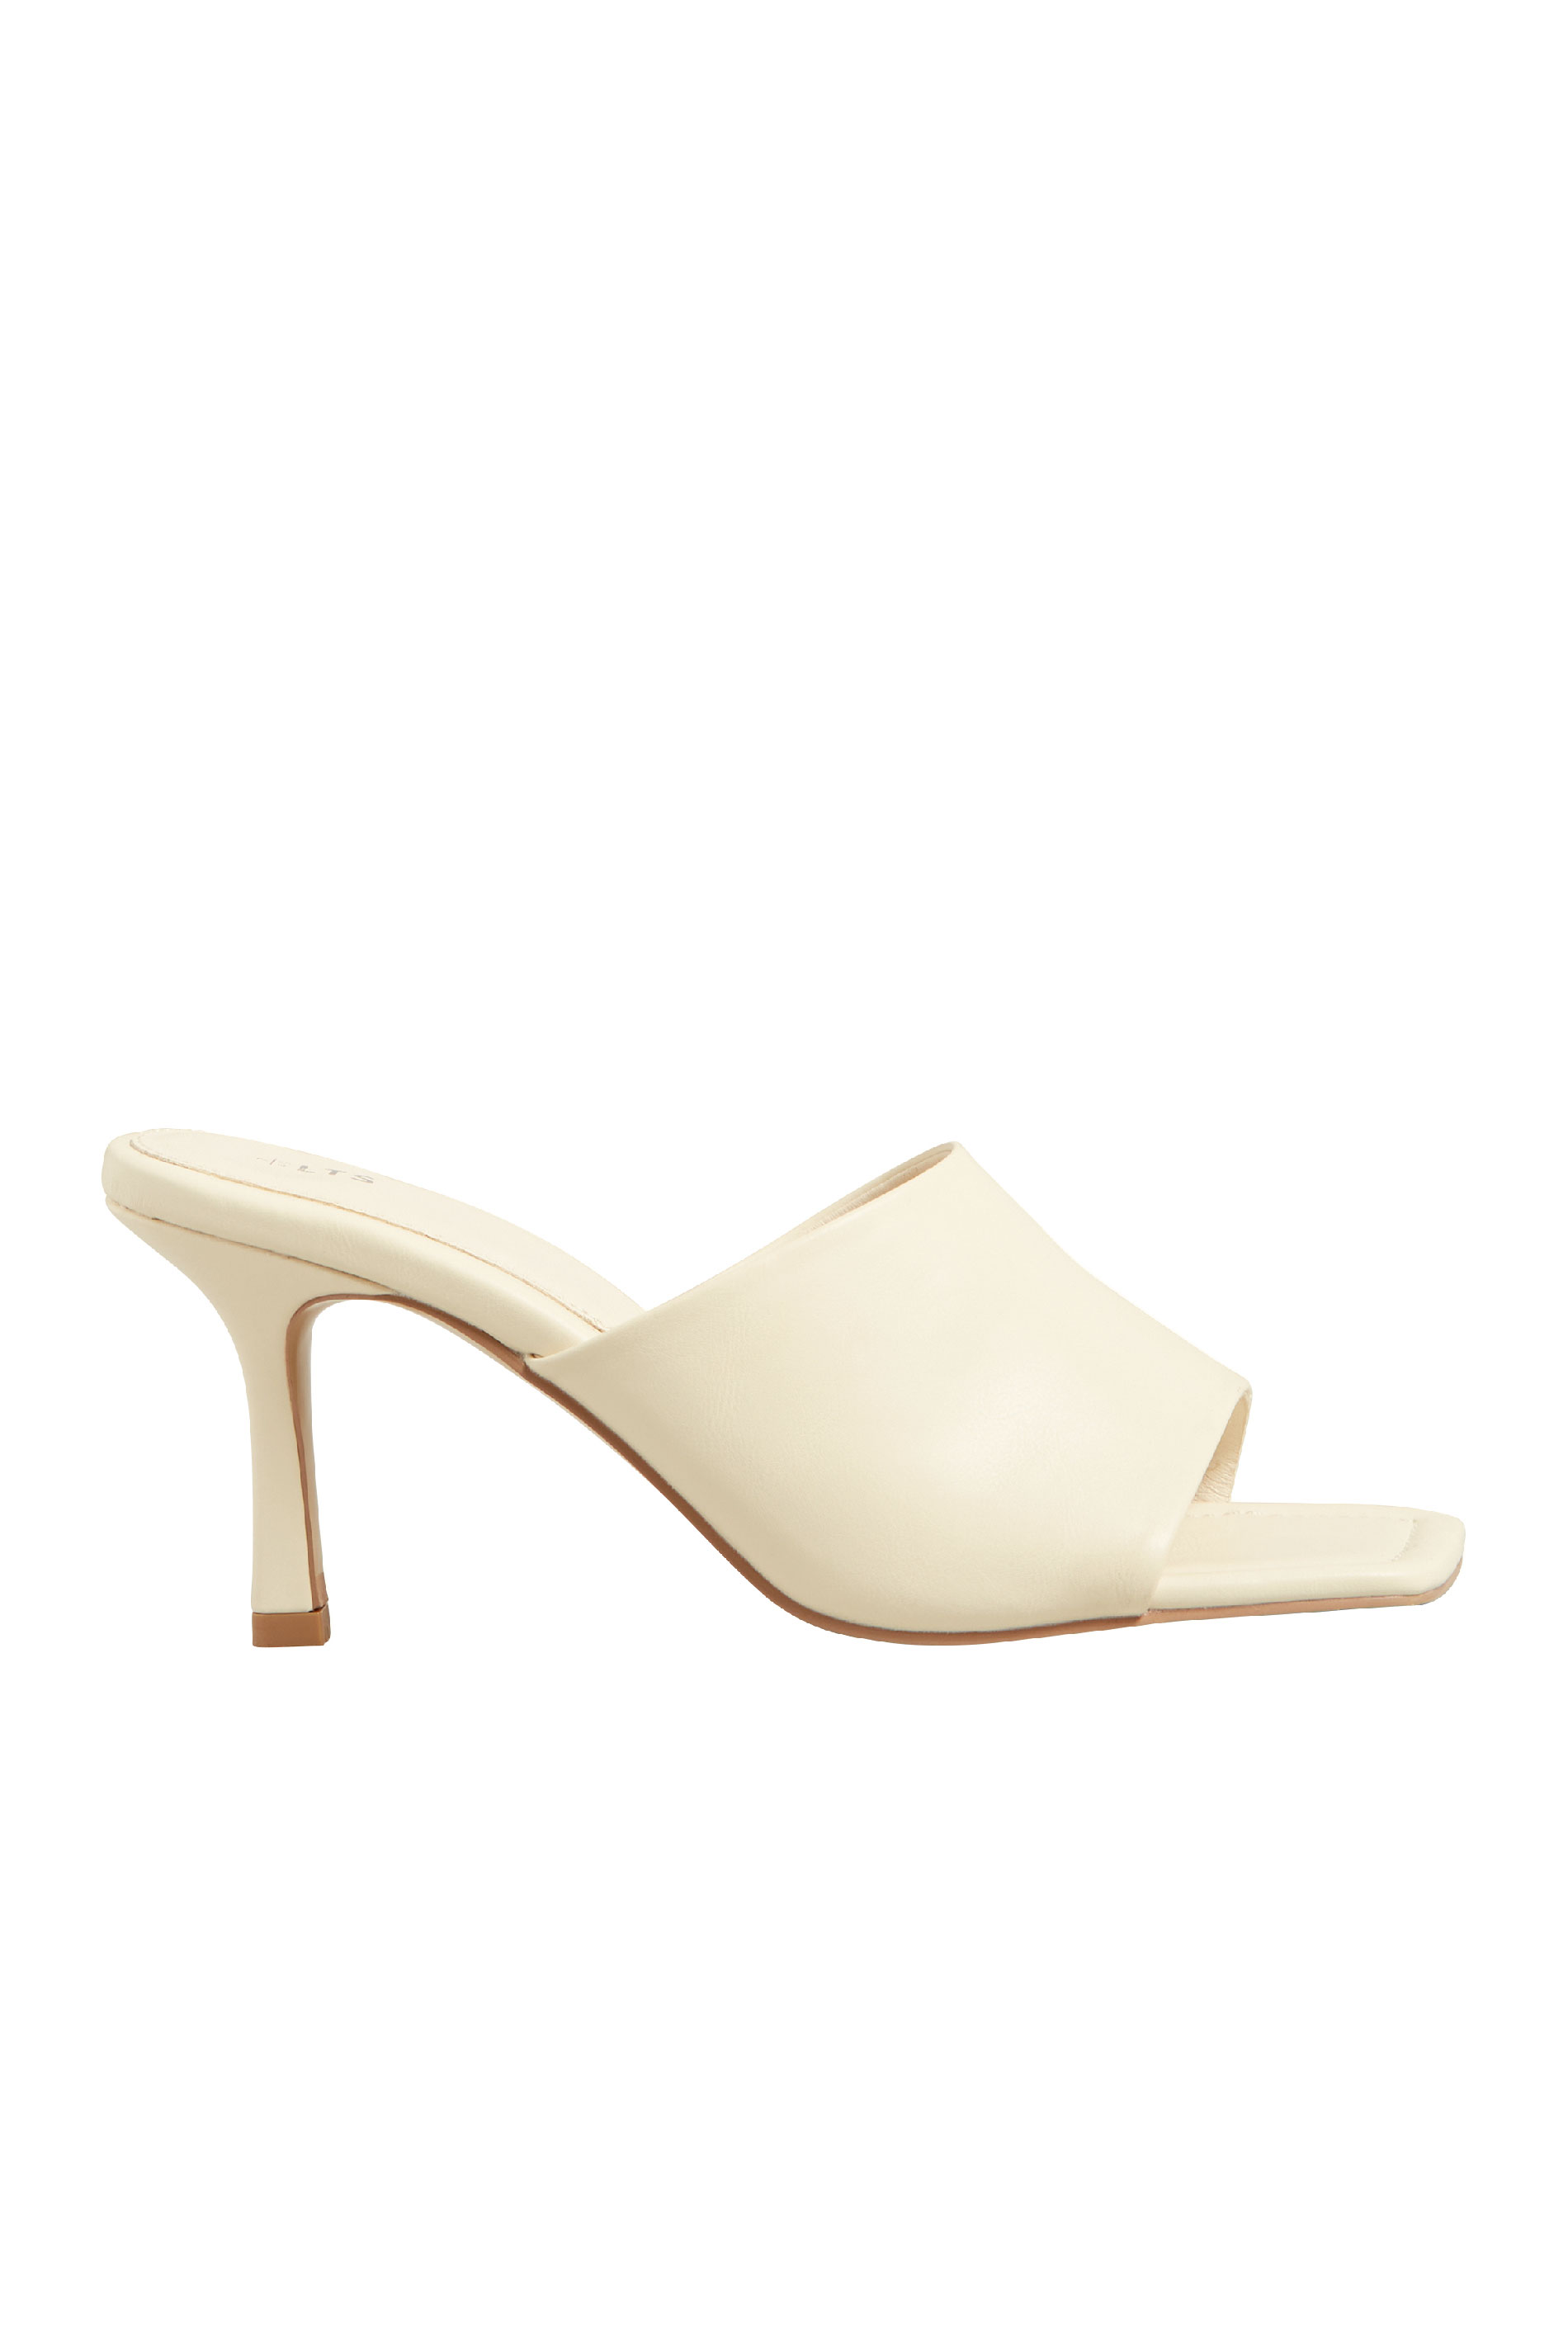 LTS Cream Skinny Heeled Mules in Standard Fit | Long Tall Sally